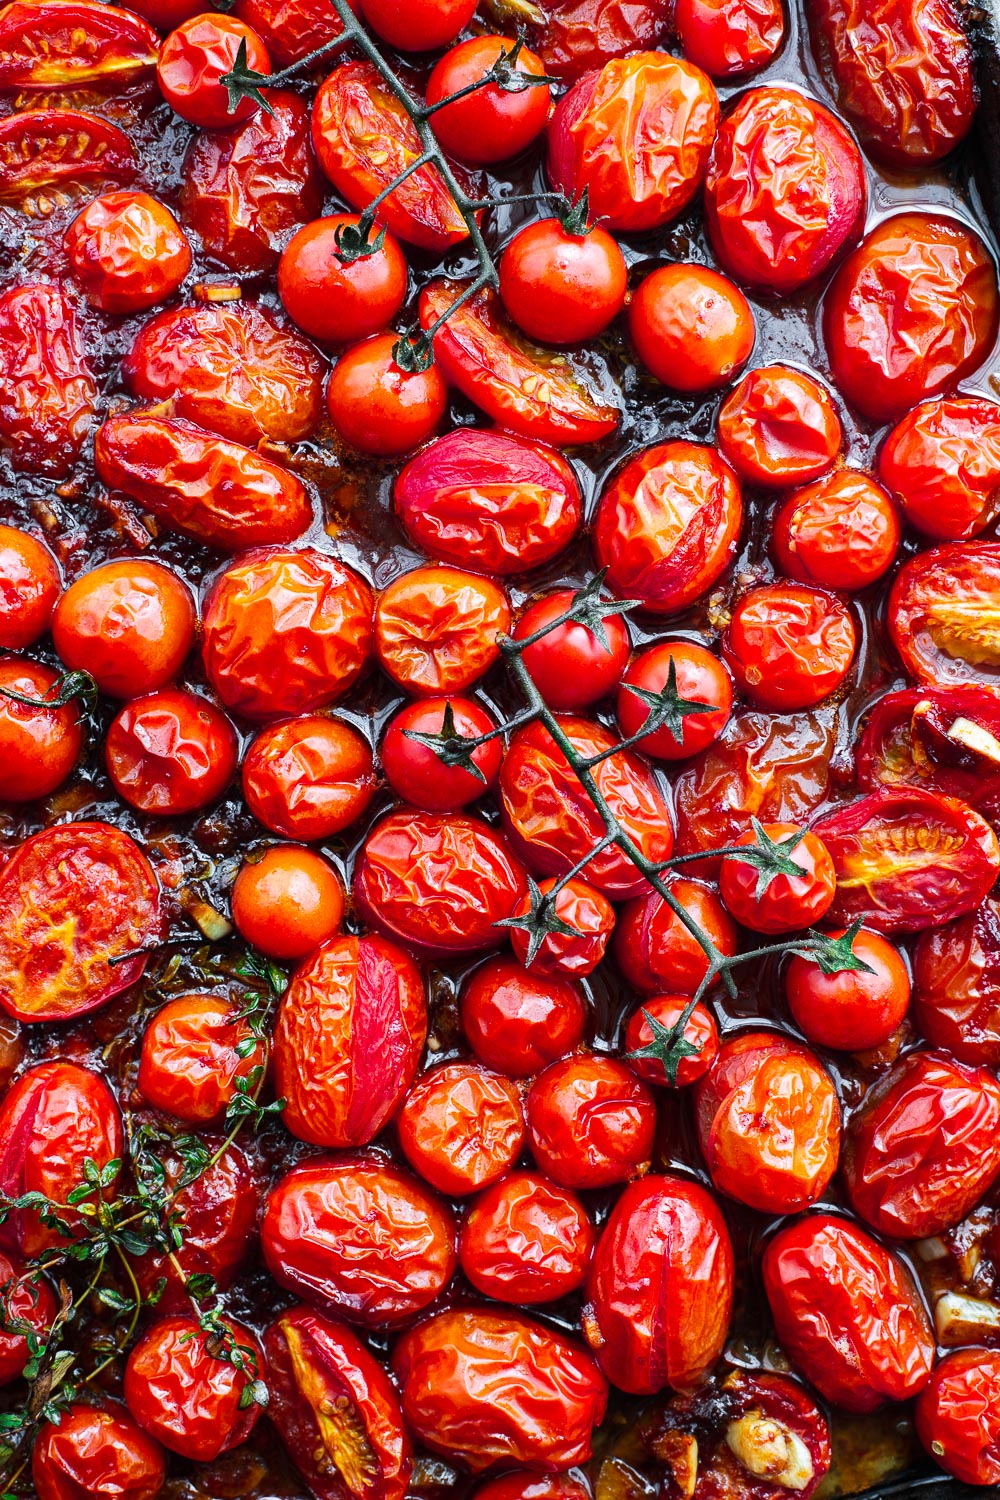 Oven-roasted harissa tomatoes in a tray viewed from above